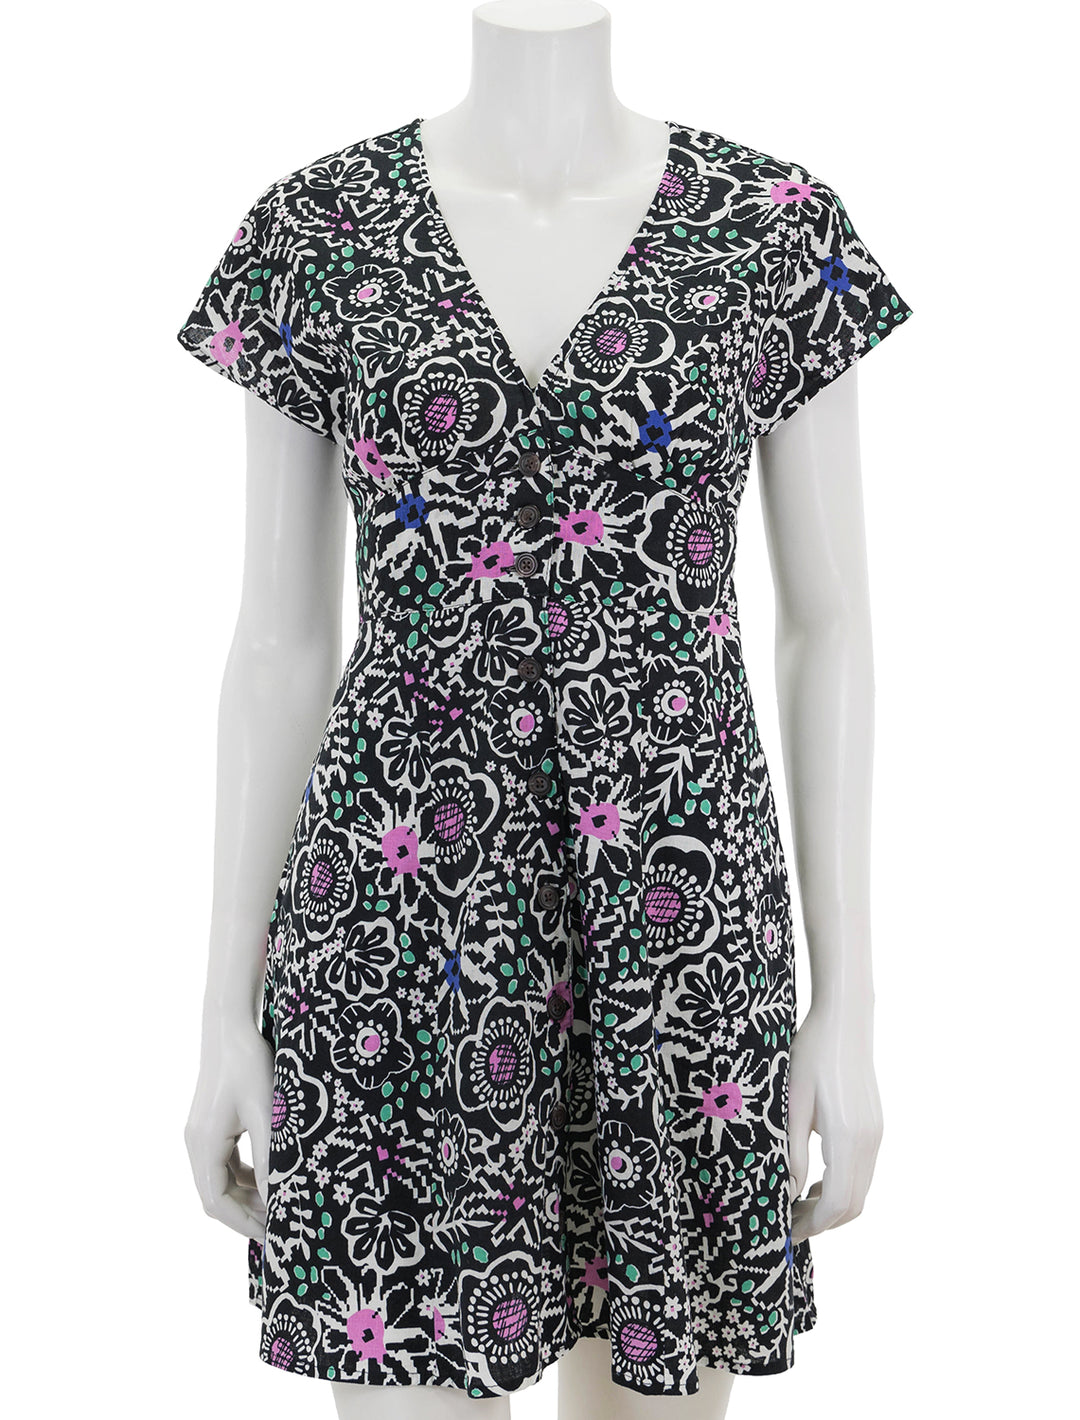 Front view of Marine Layer's camila mini dress in floral block print.